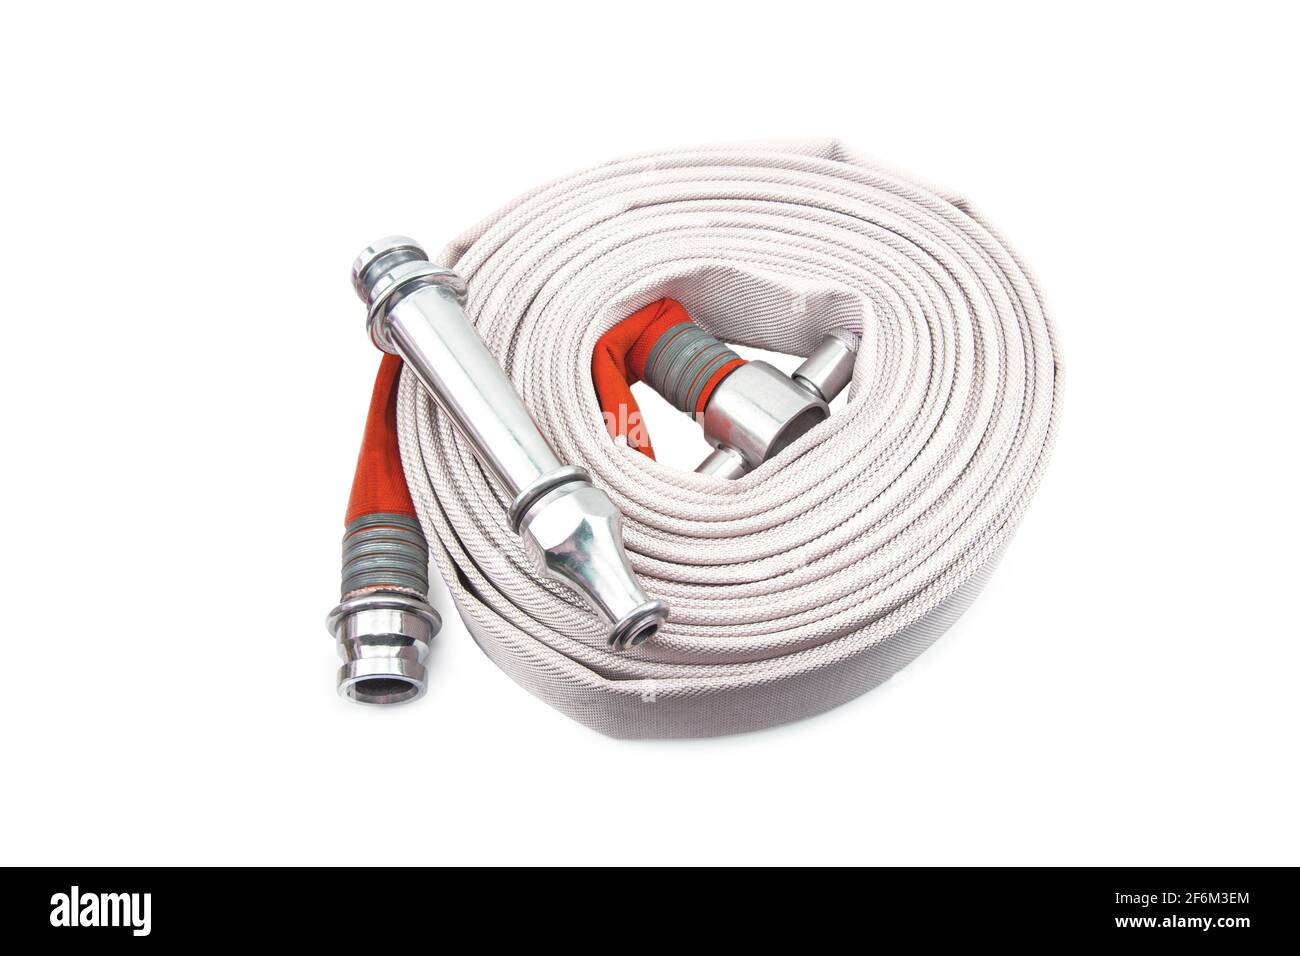 The red fire hose is isolated on the white background. Stock Photo